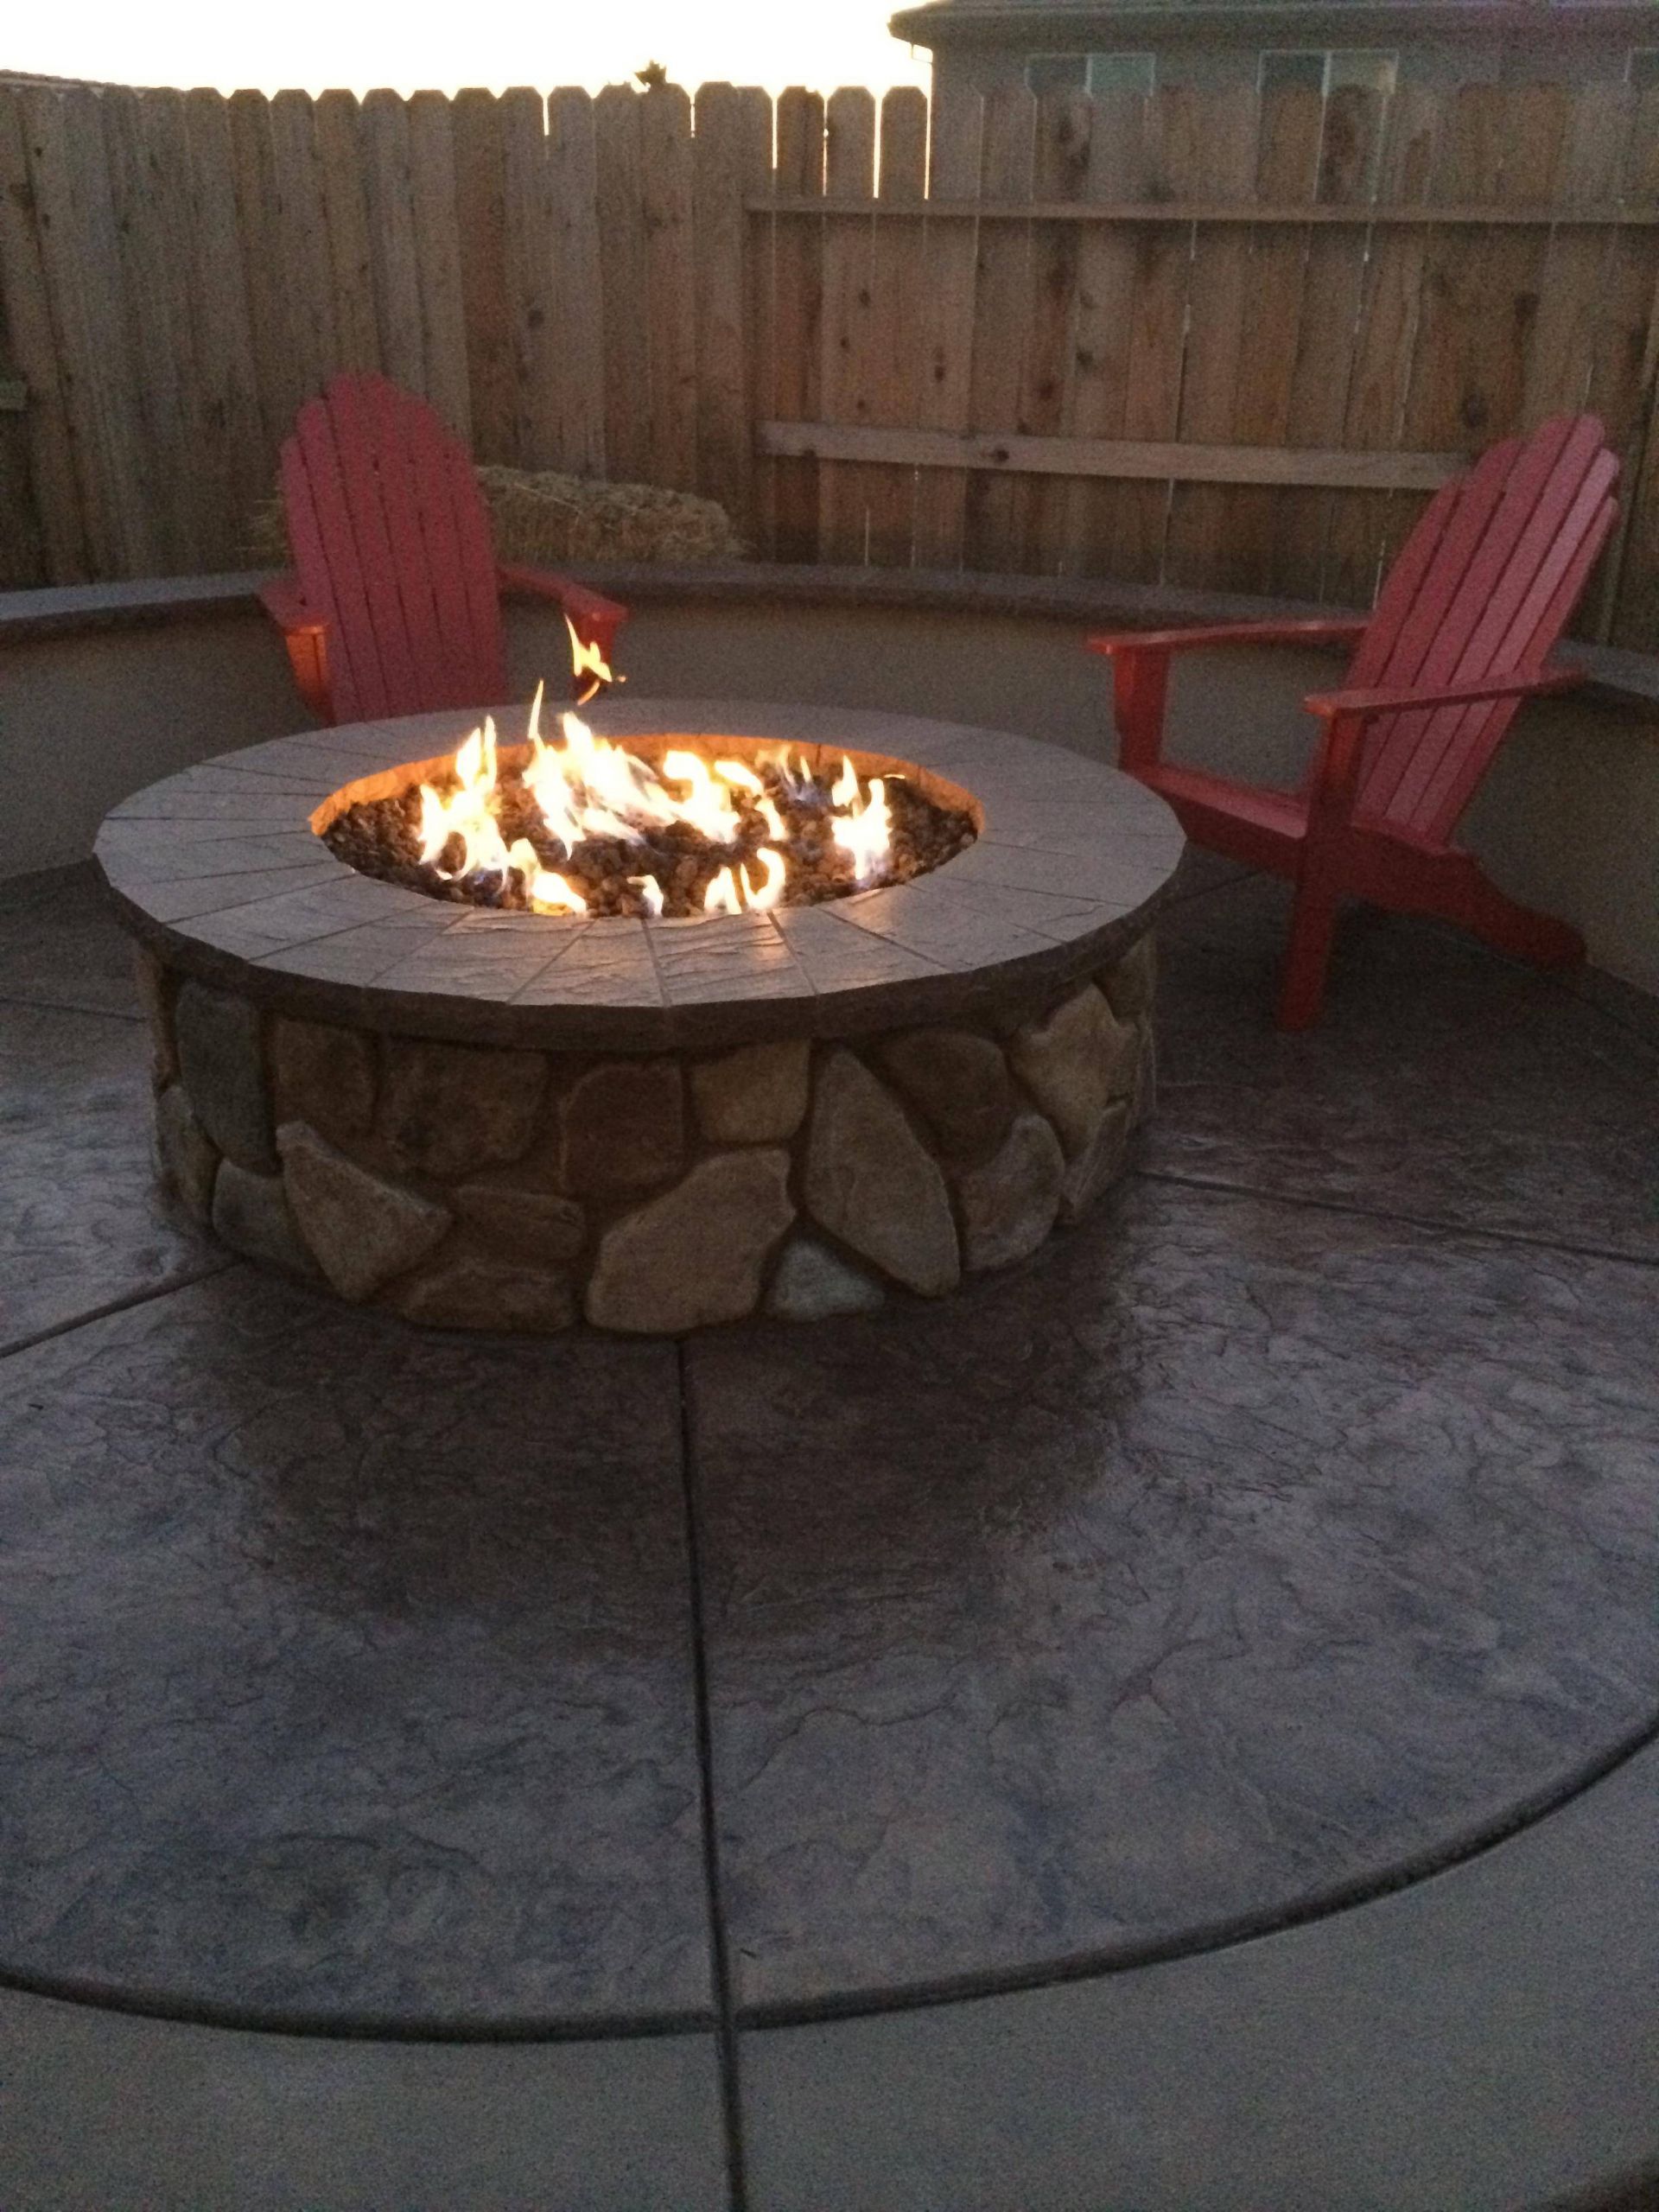 DIY Outdoor Propane Fire Pit
 fireplace How can I my gas fire pit to have a larger